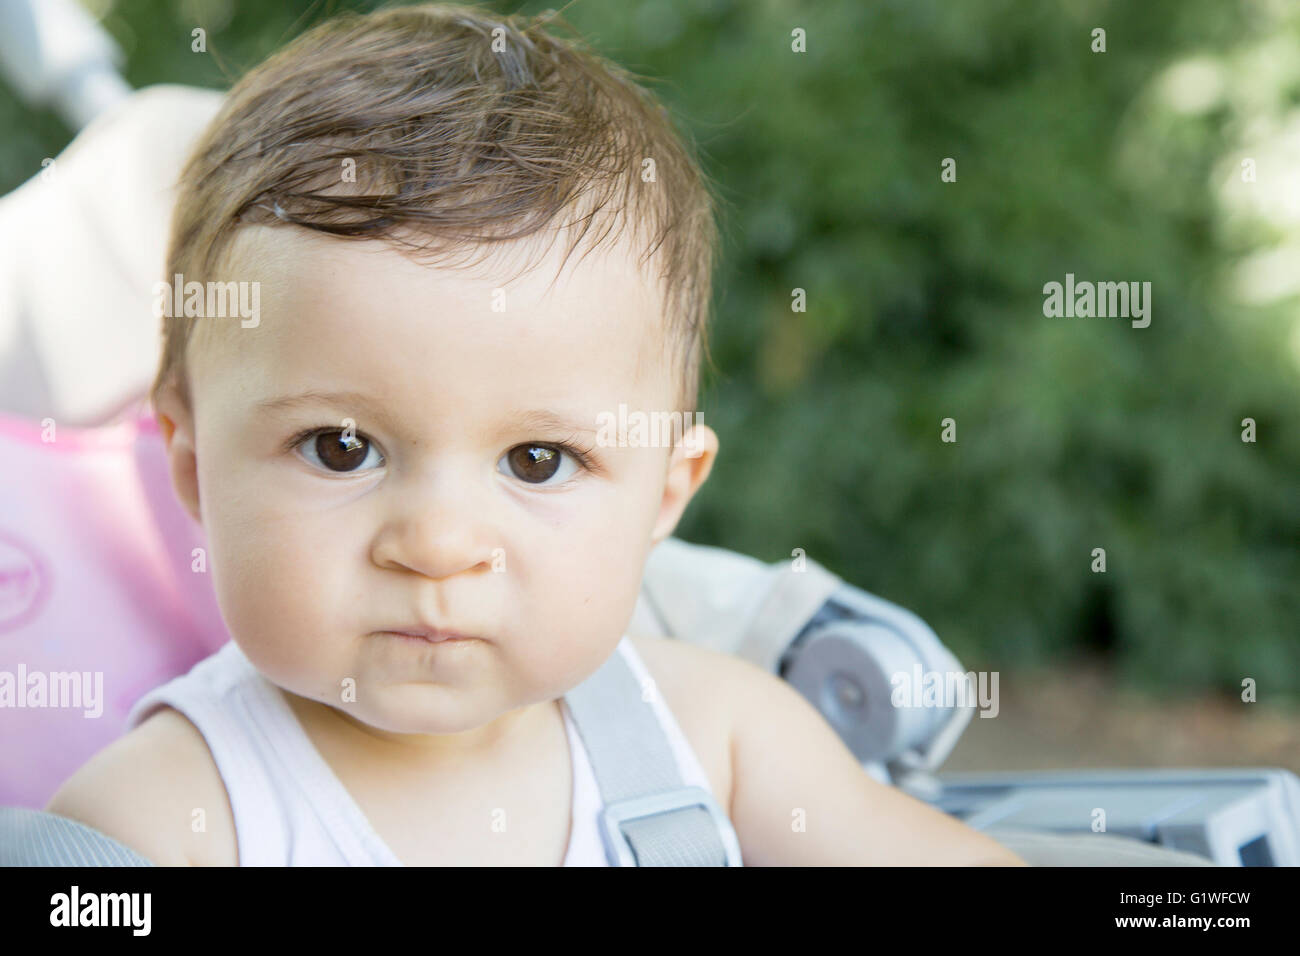 One year old baby looking angrily at camera while sitting against of green background Stock Photo